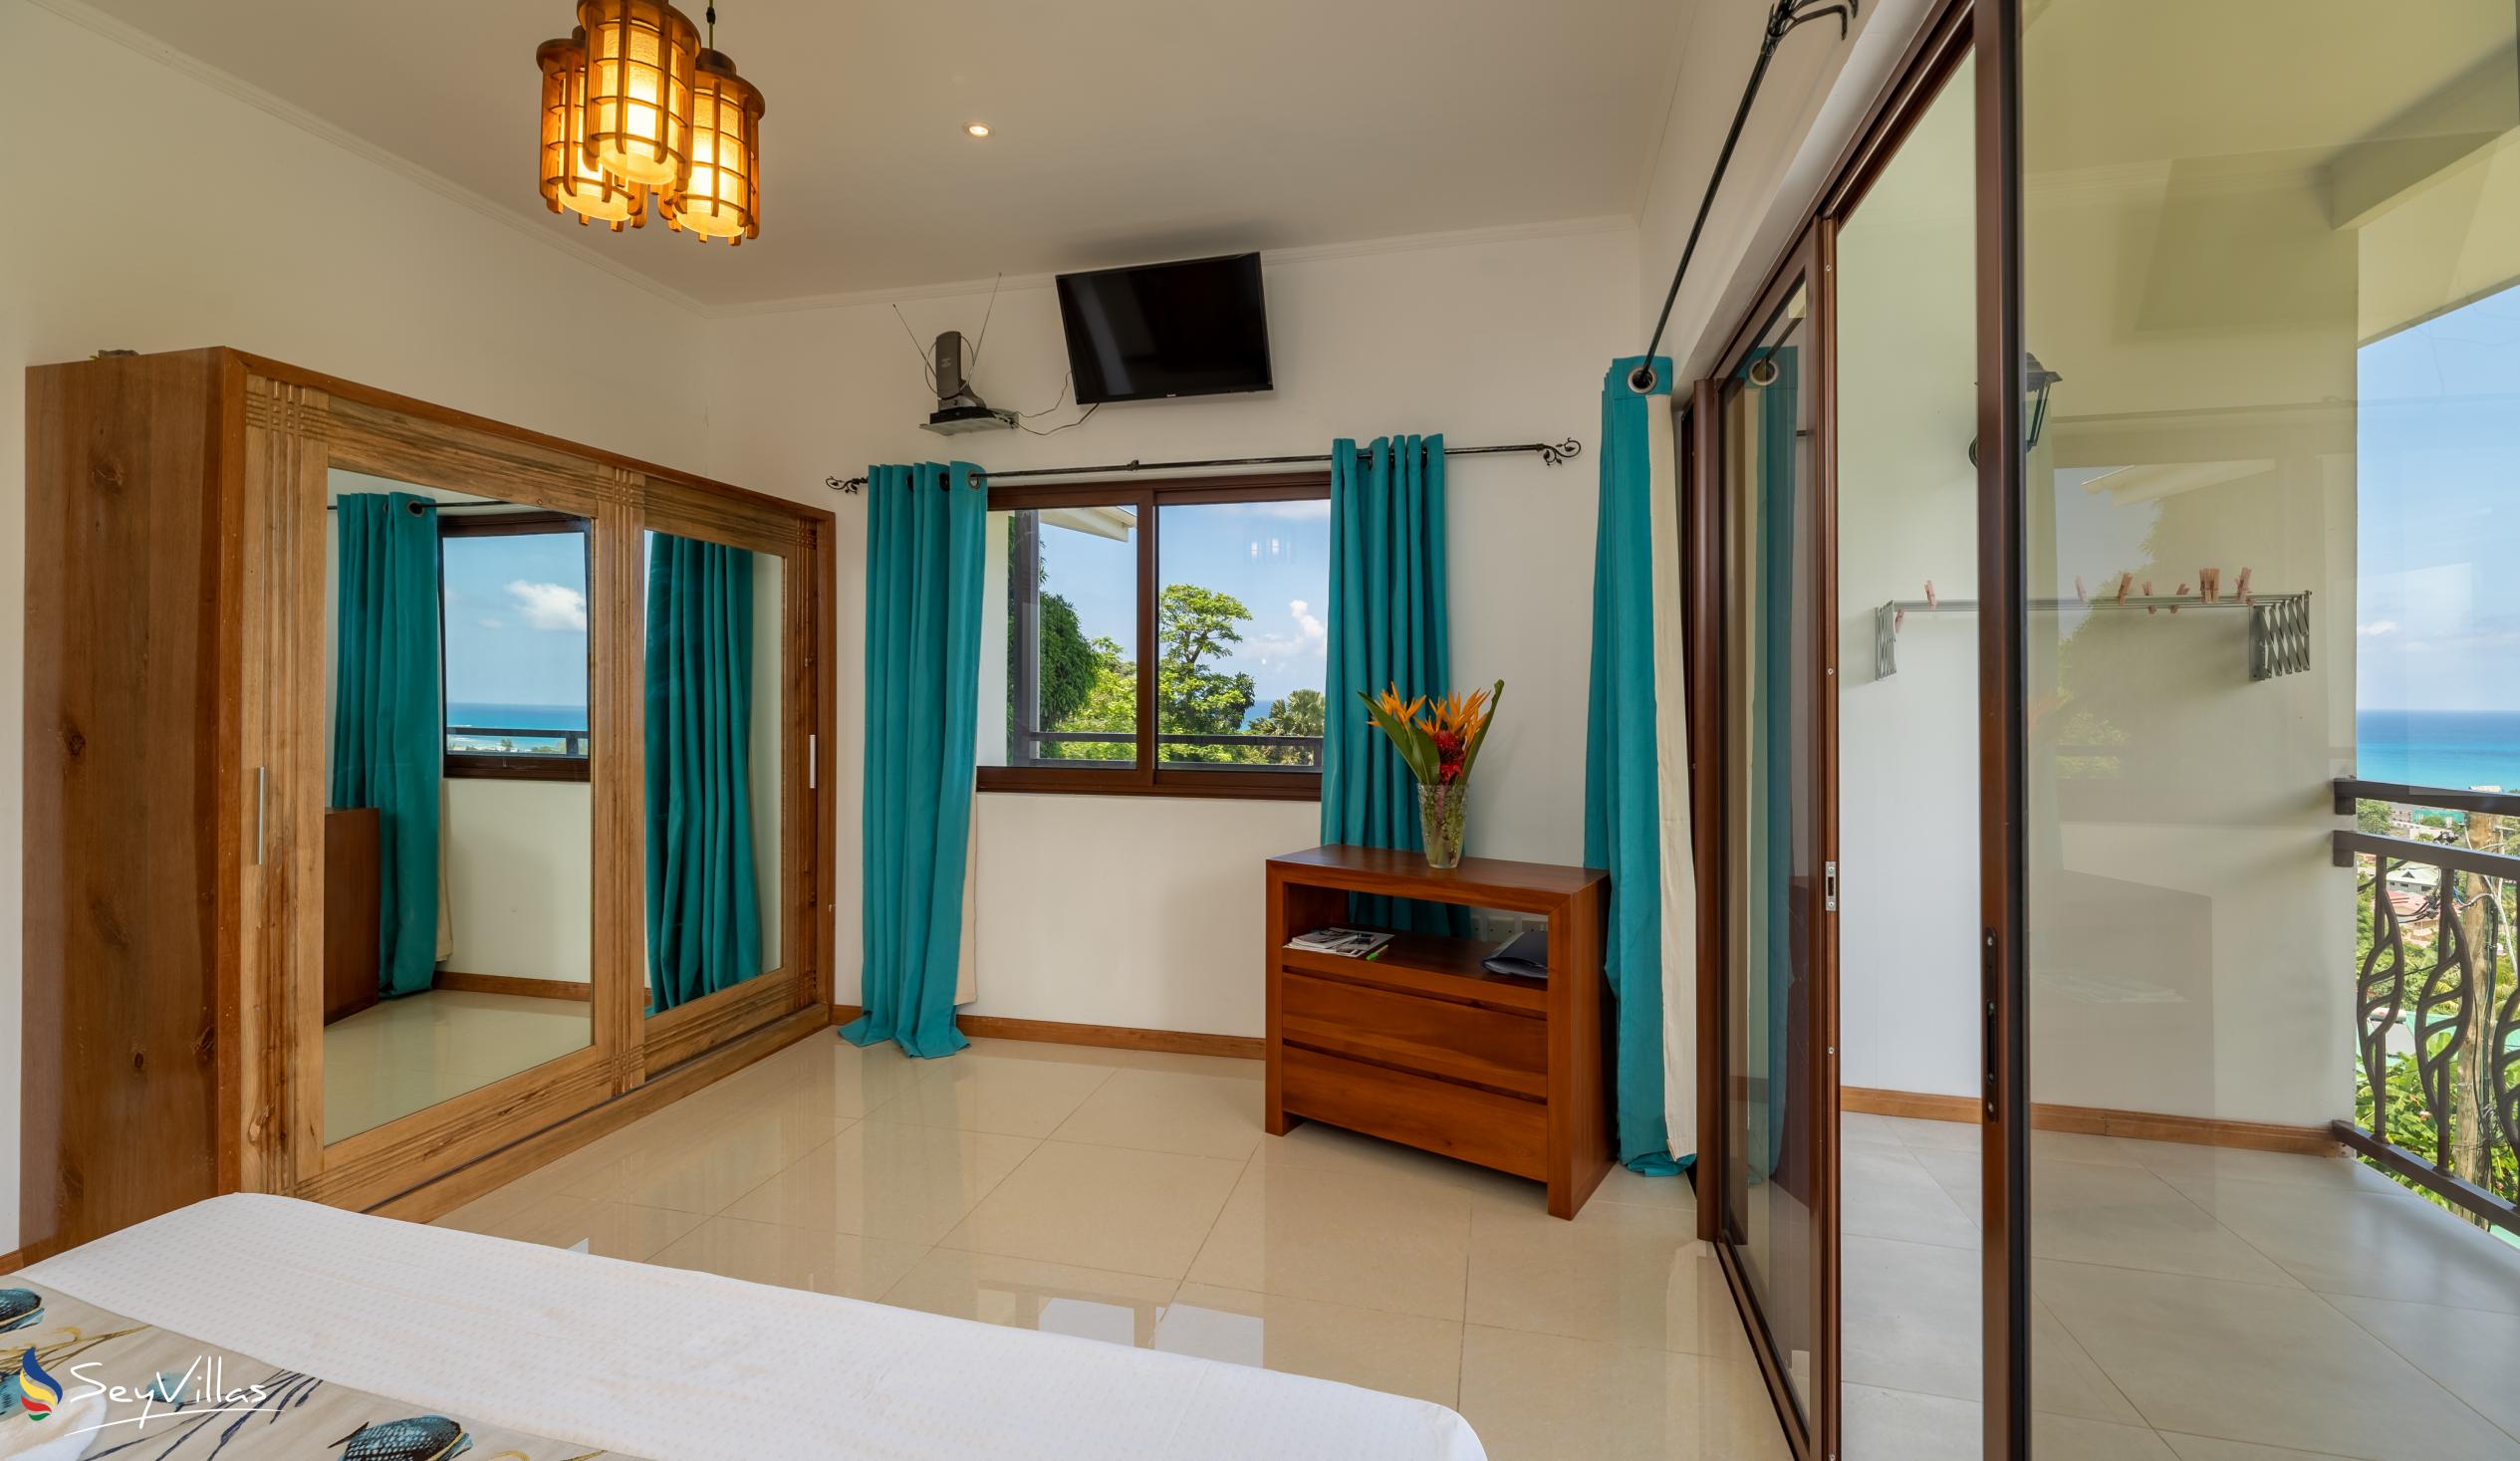 Foto 30: Tama's Holiday Apartments - Appartement 1 chambre - Mahé (Seychelles)